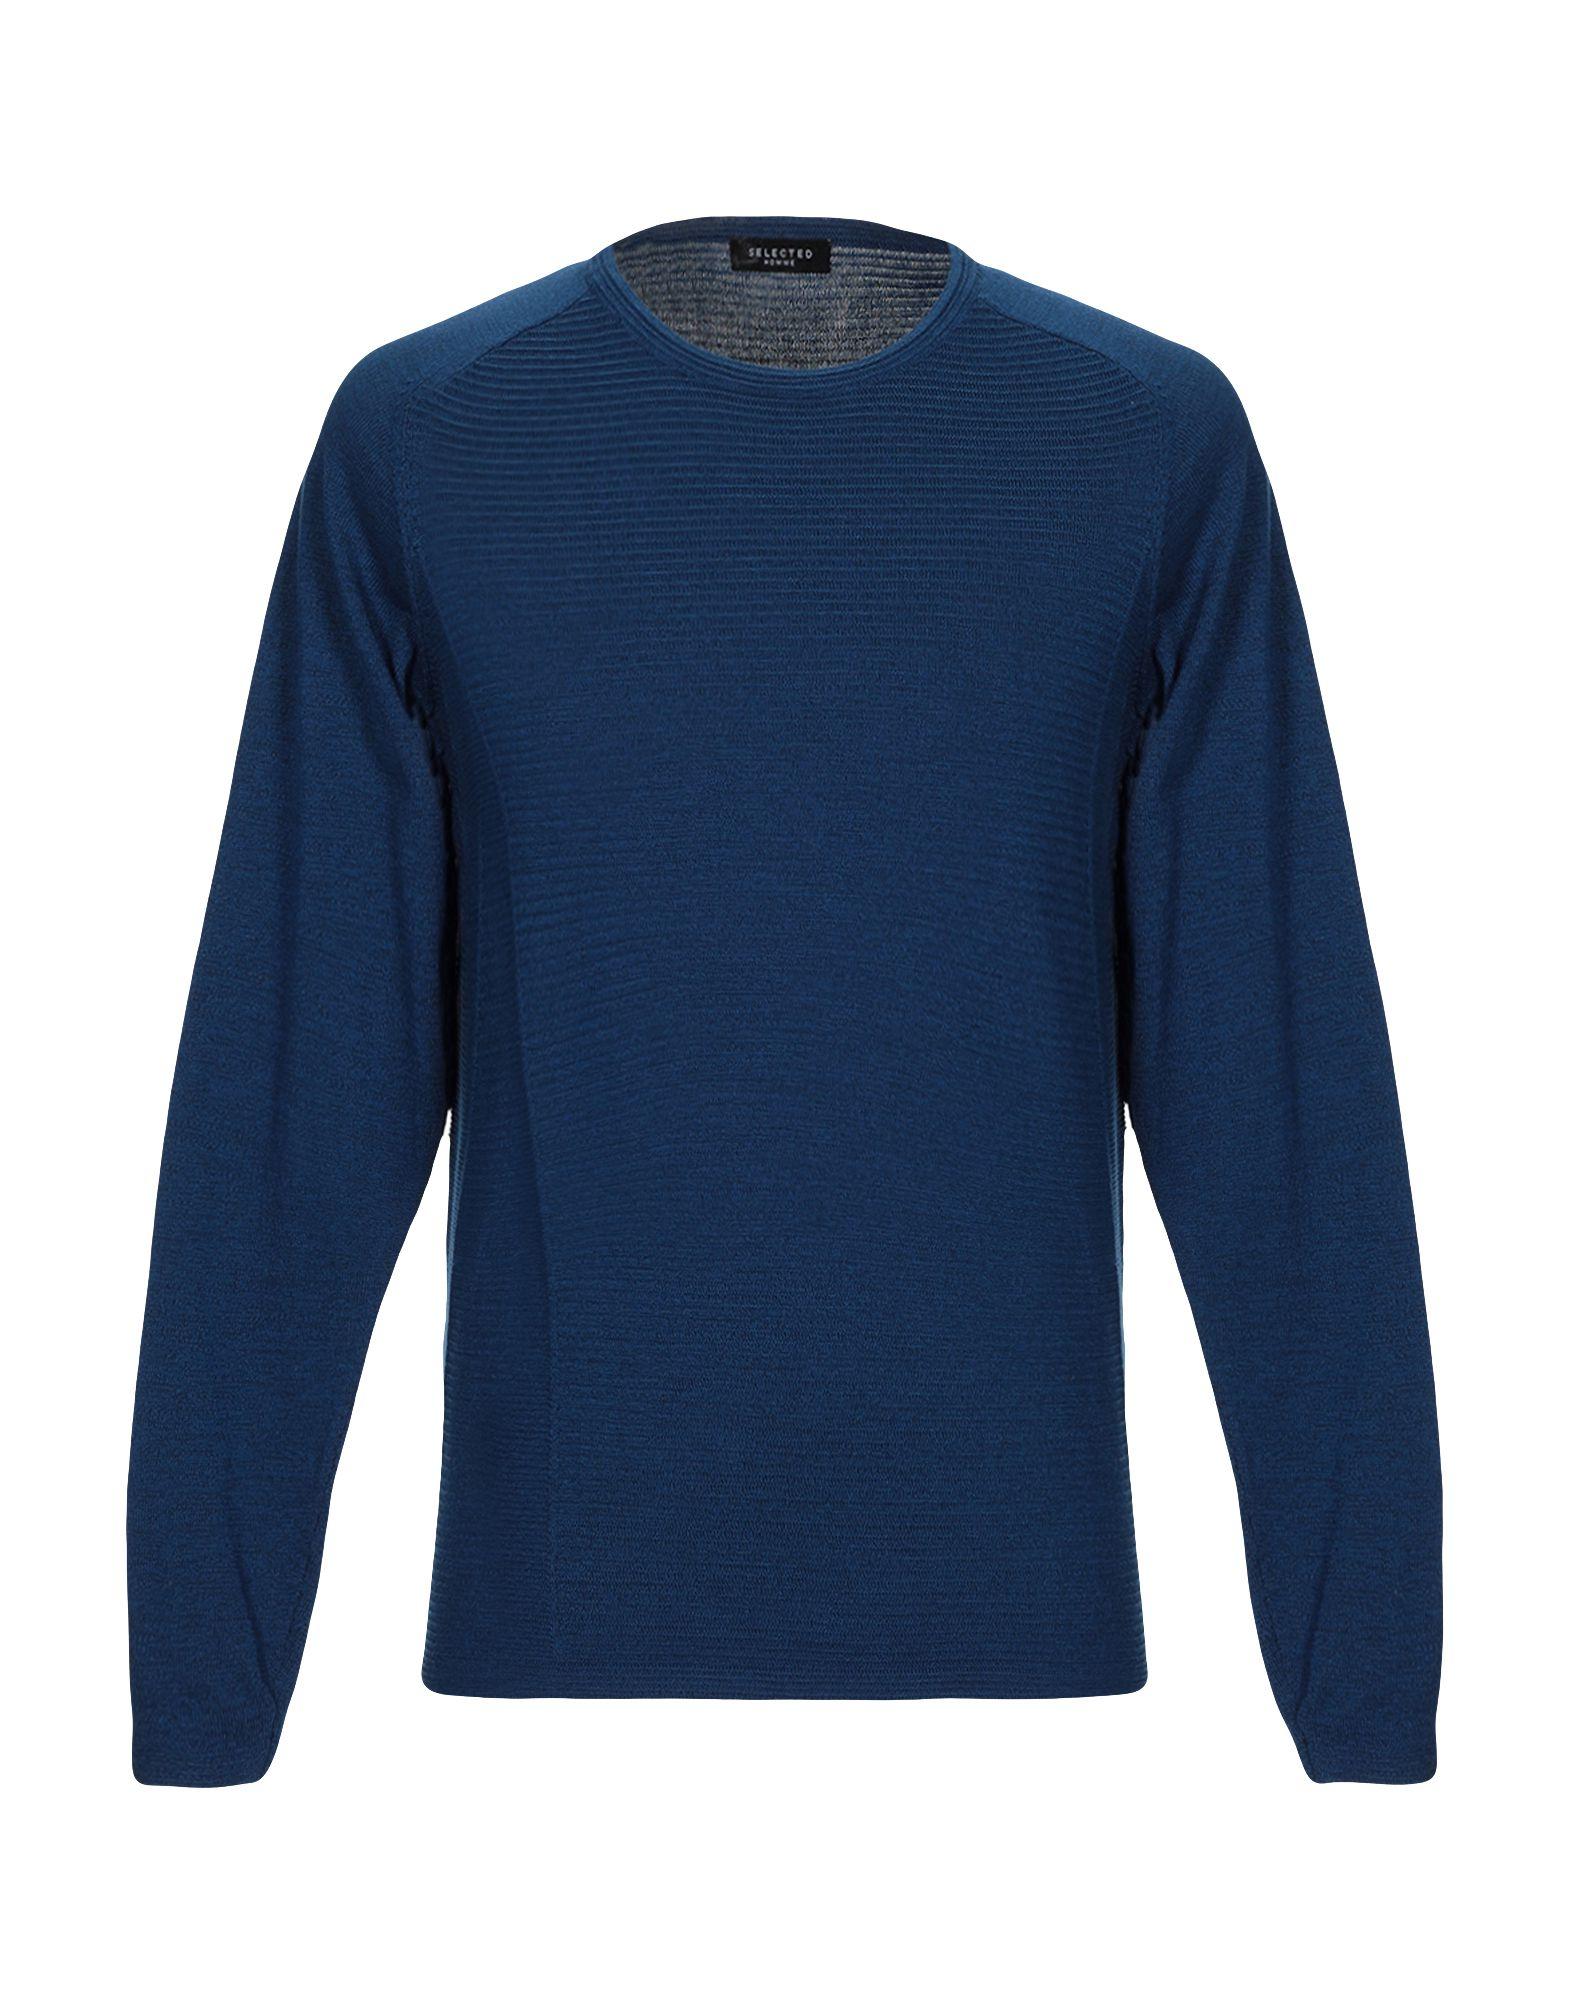 SELECTED Cotton Sweater in Blue for Men - Lyst